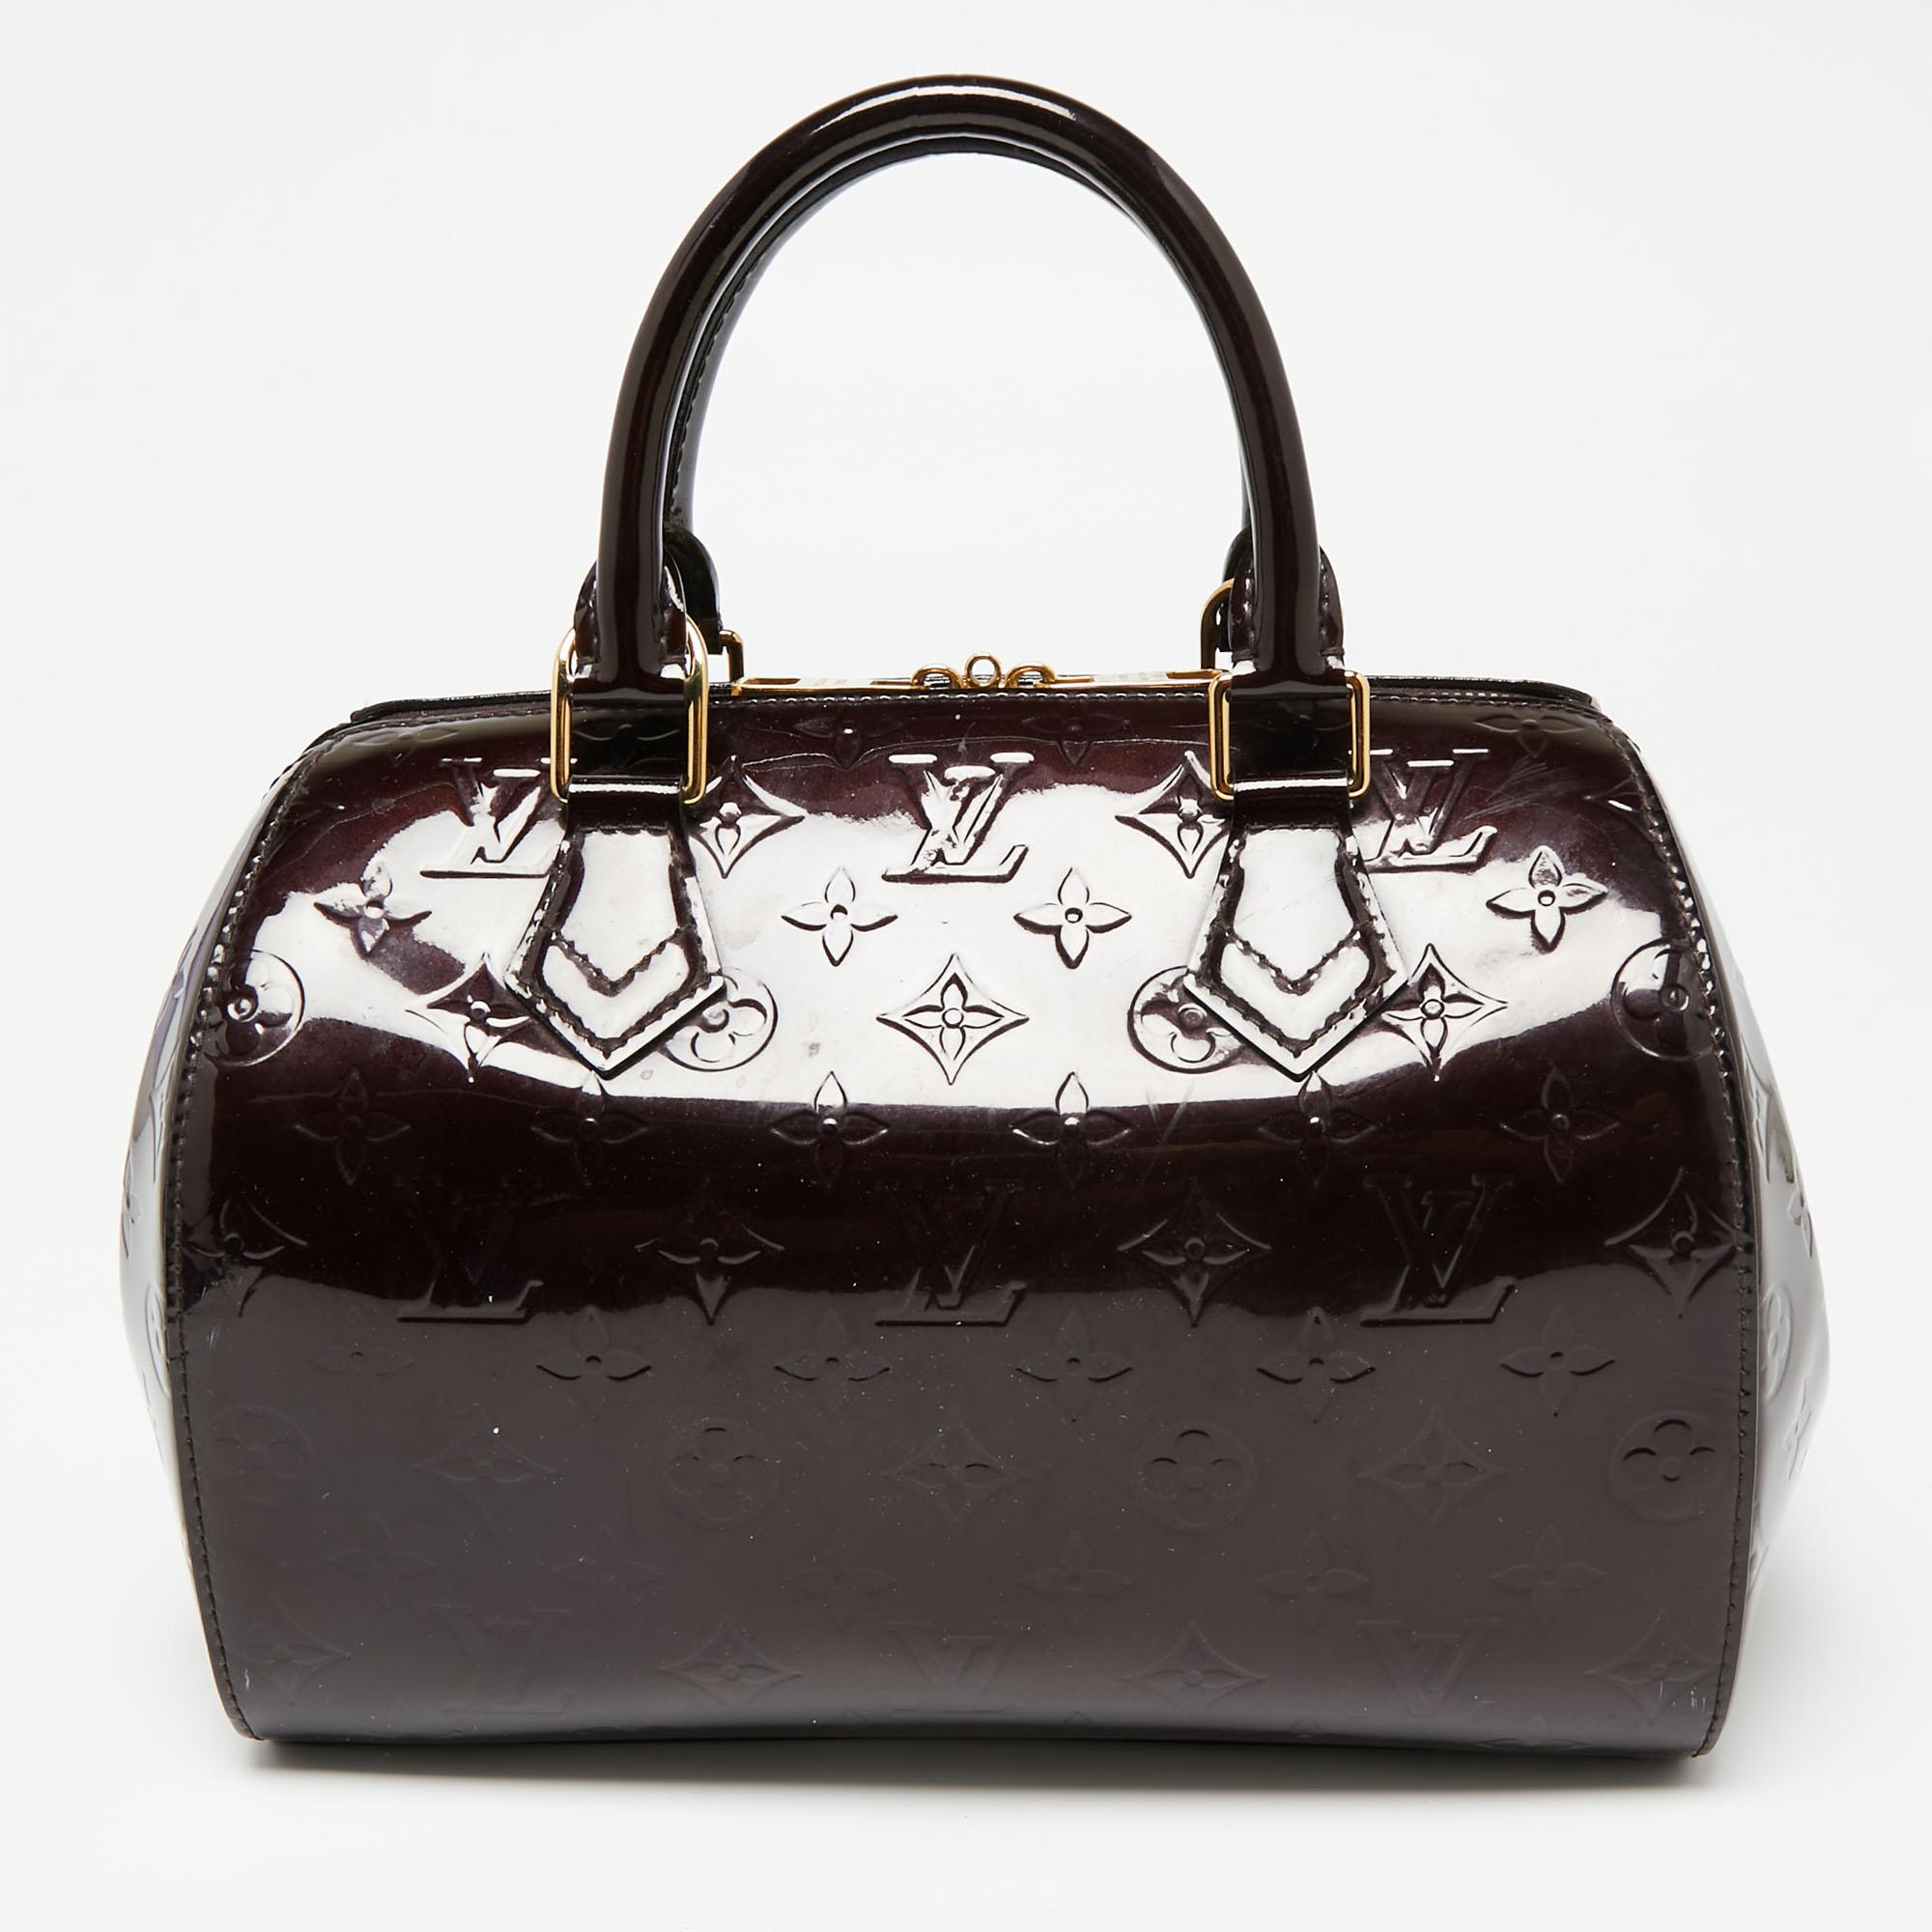 Louis Vuitton's handbags are popular owing to their high style and functionality. Crafted from beautiful monogram Vernis, the Montana bag features dual top handles, gold-tone hardware, and protective metal feet. The zip-top closure opens to a